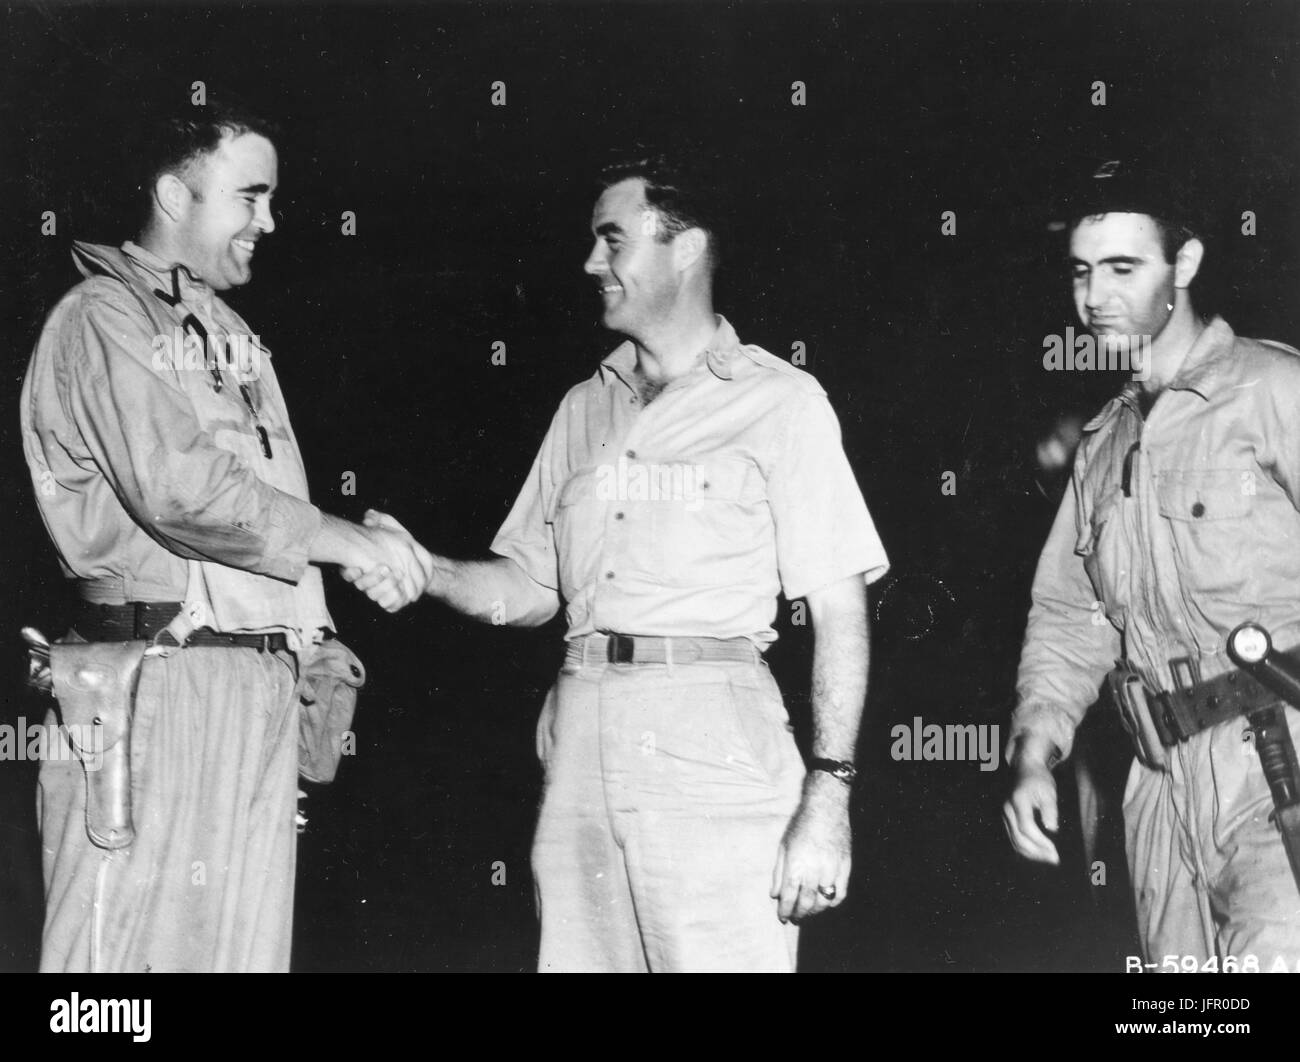 Major Charles W. Sweeney (left), pilot of the B-29 BOCKSCAR which dropped the atomic bomb on Nagasaki on August 9, 1945, is shown before his mission shaking hands with Col Paul W. Tibbets, pilot of ENOLA GAY which atom bombed Hiroshima on 6 August 1945. Man at right is Capt James Van Pelt, navigator for Maj Sweeney. Tinian, August 9, 1945 Stock Photo